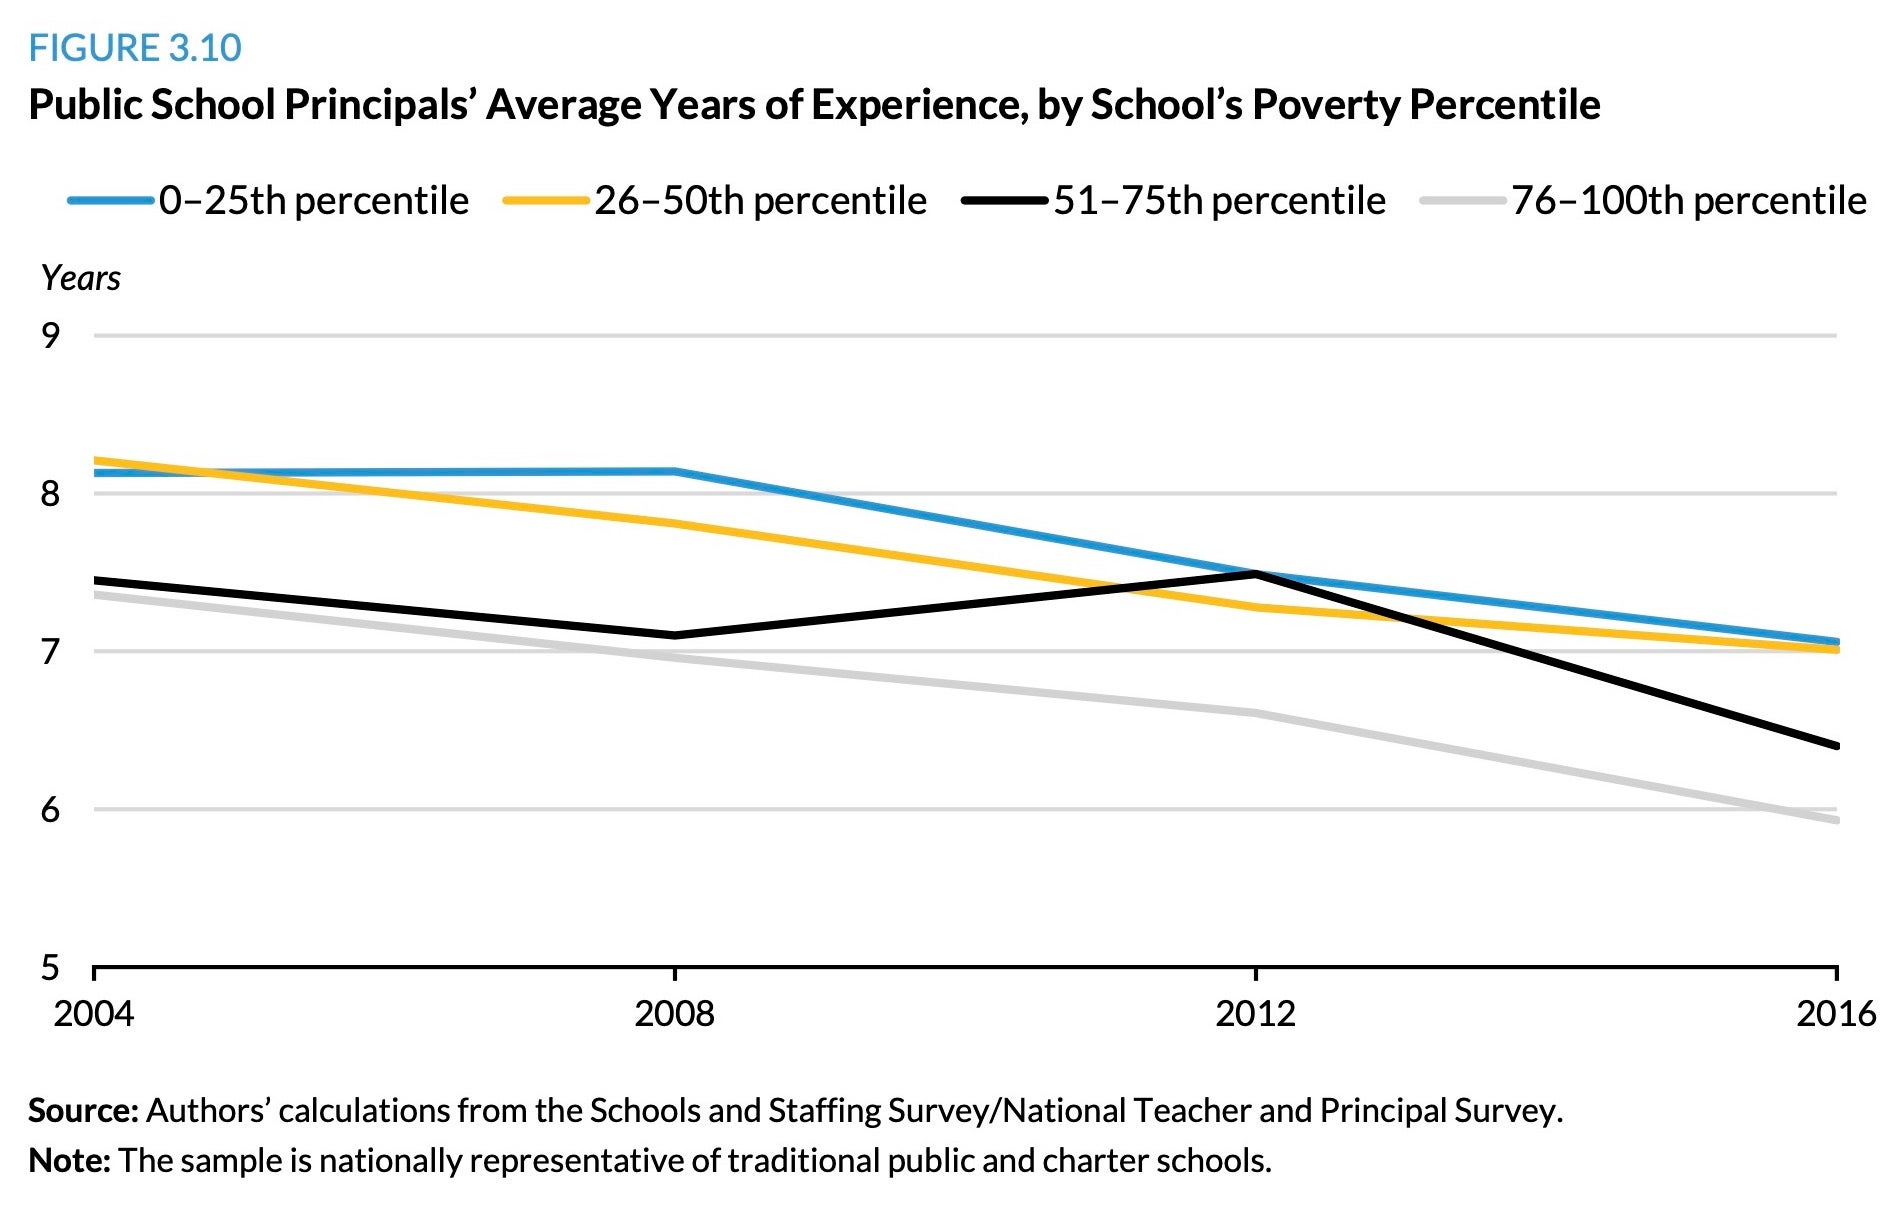 Figure 3.10 Public School Principals' Average Years of Experience, by School's Poverty Percentile